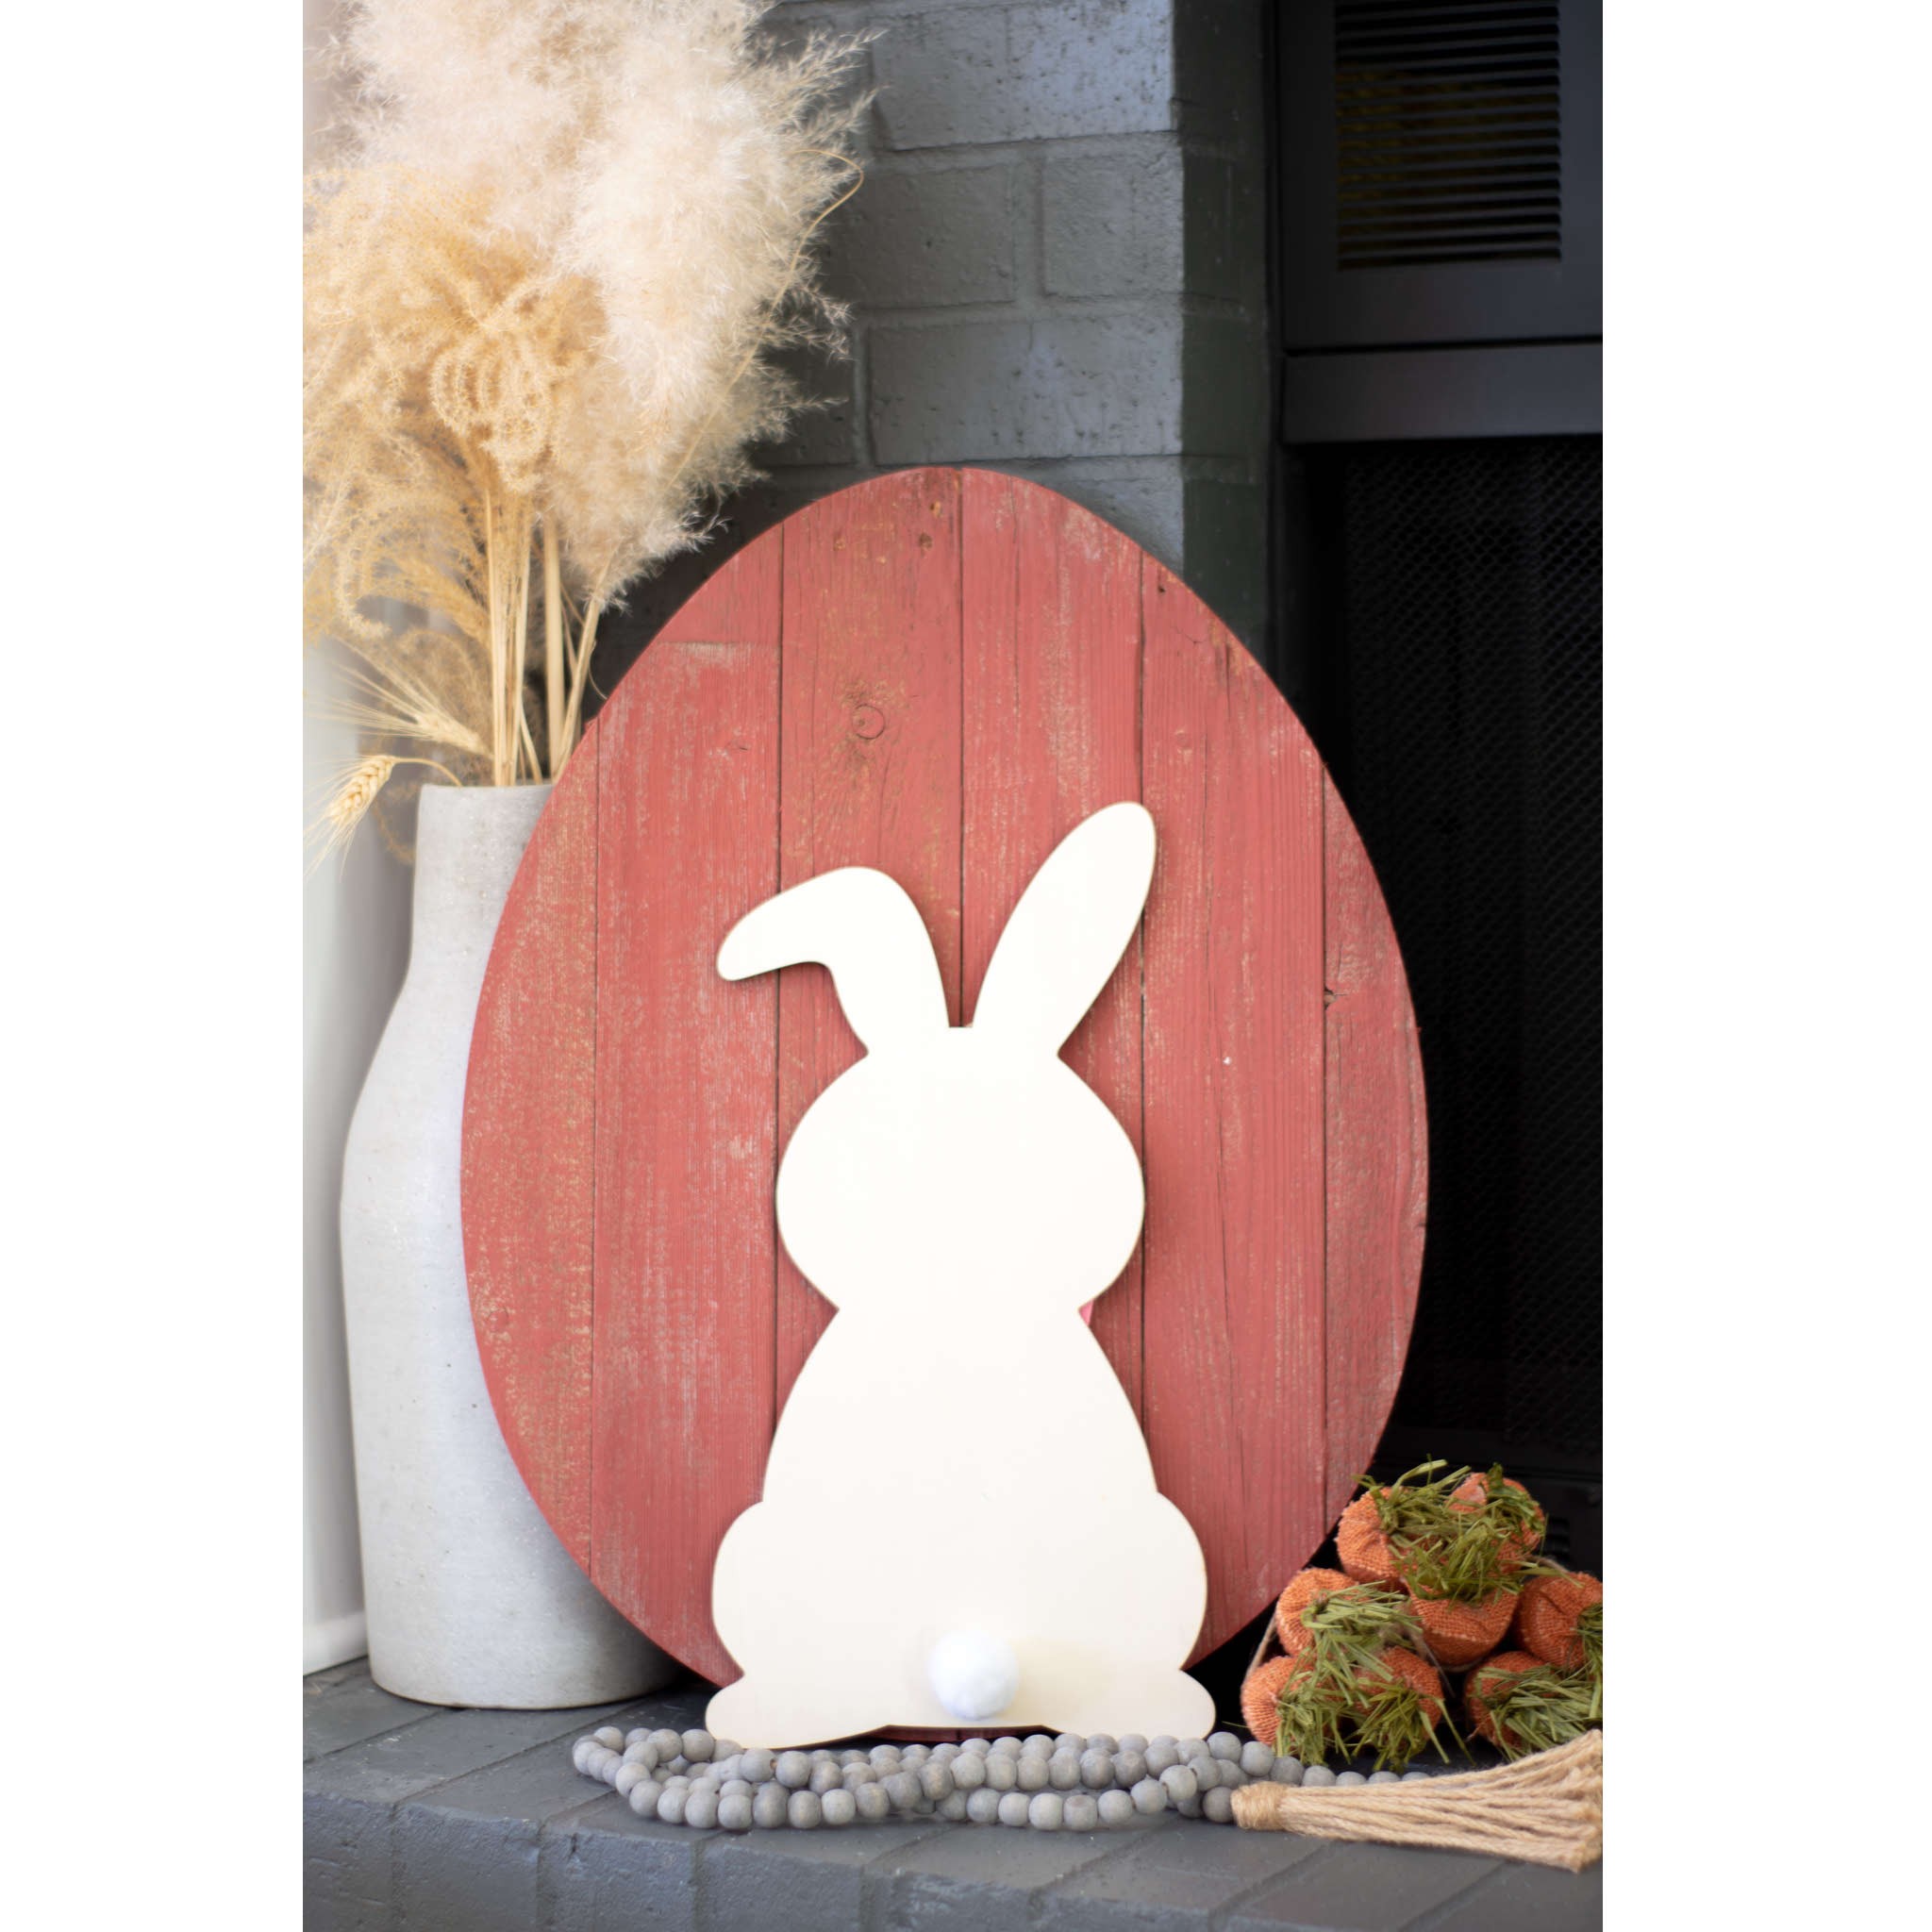 24" Rustic Farmhouse Red Wood Large Egg